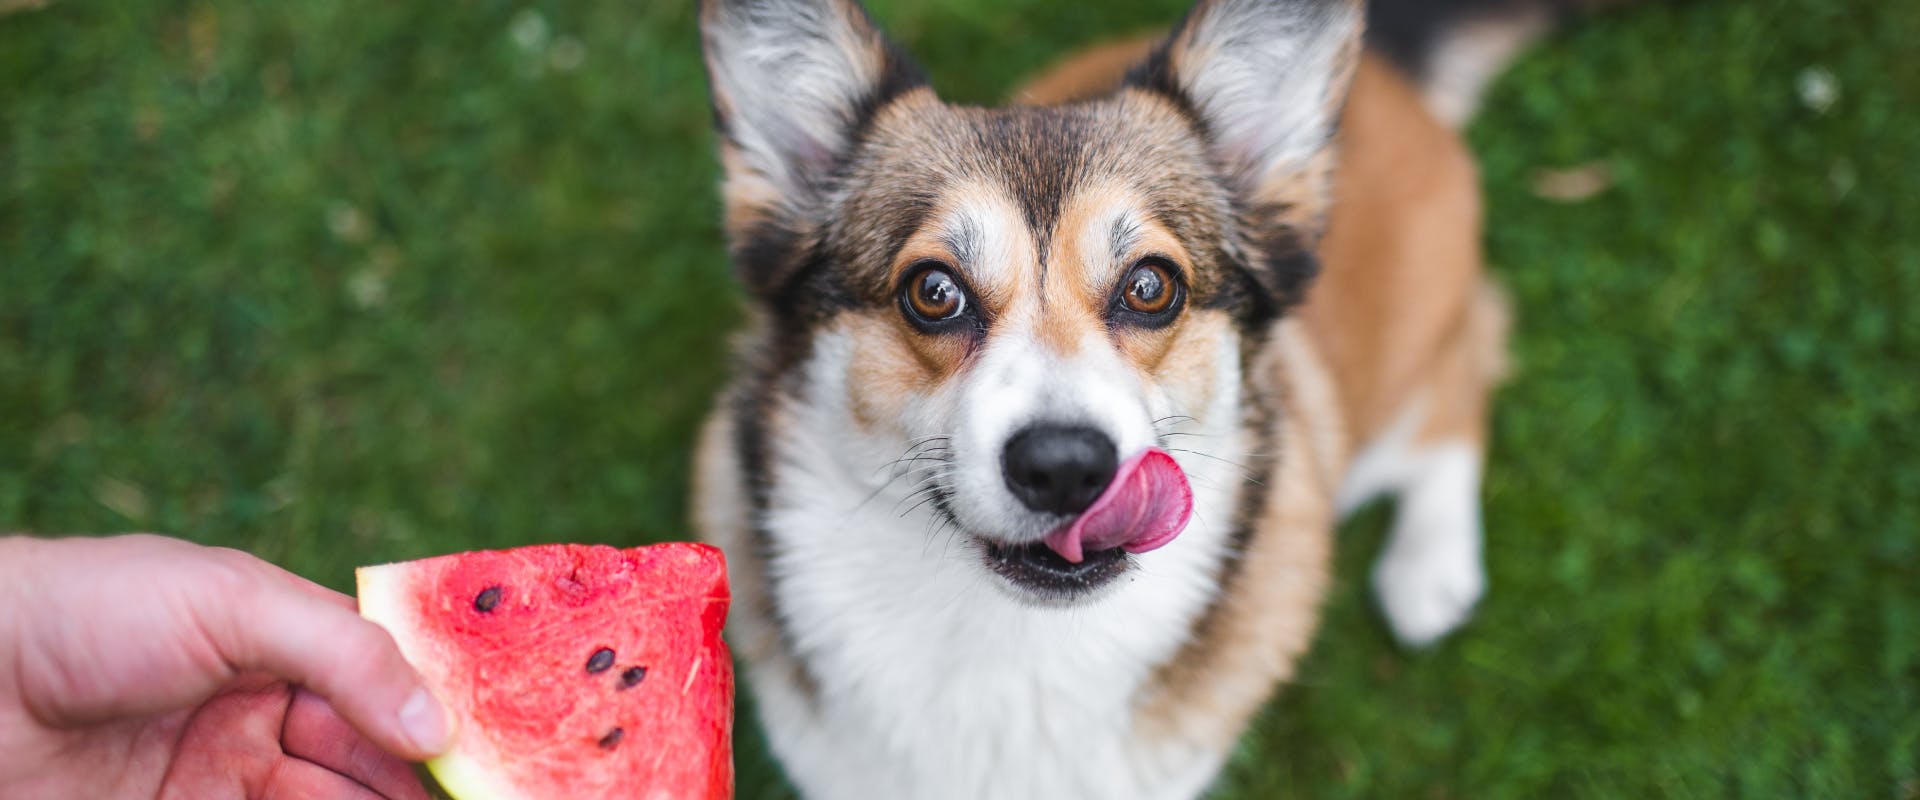 a corgi looking up and licking its lips at a slide of watermelon held by a human's hand